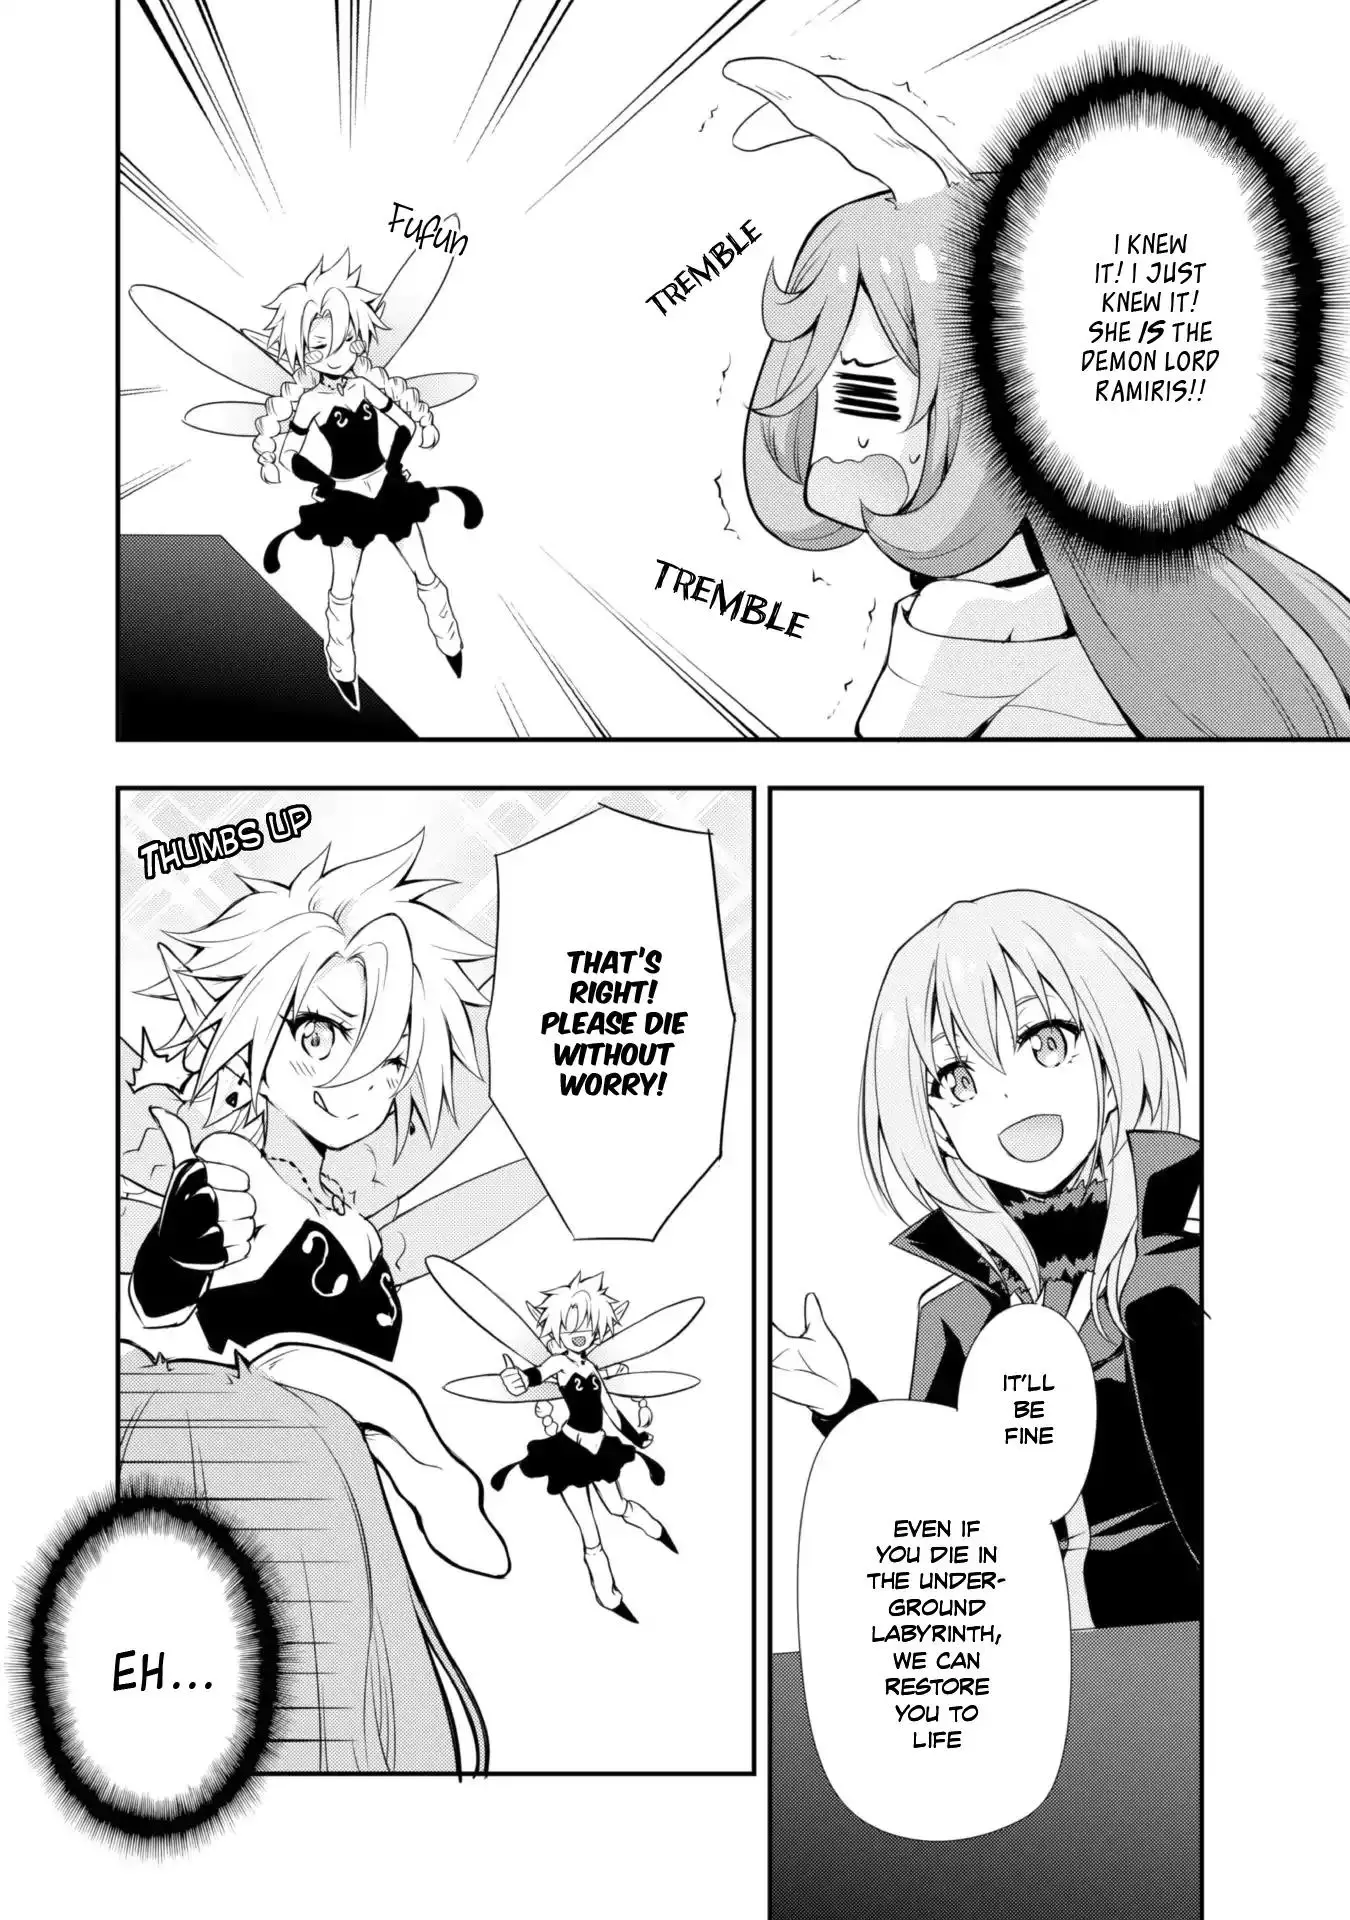 Tensei Shitara Slime Datta Ken: The Ways of Strolling in the Demon Country - 5 page 7